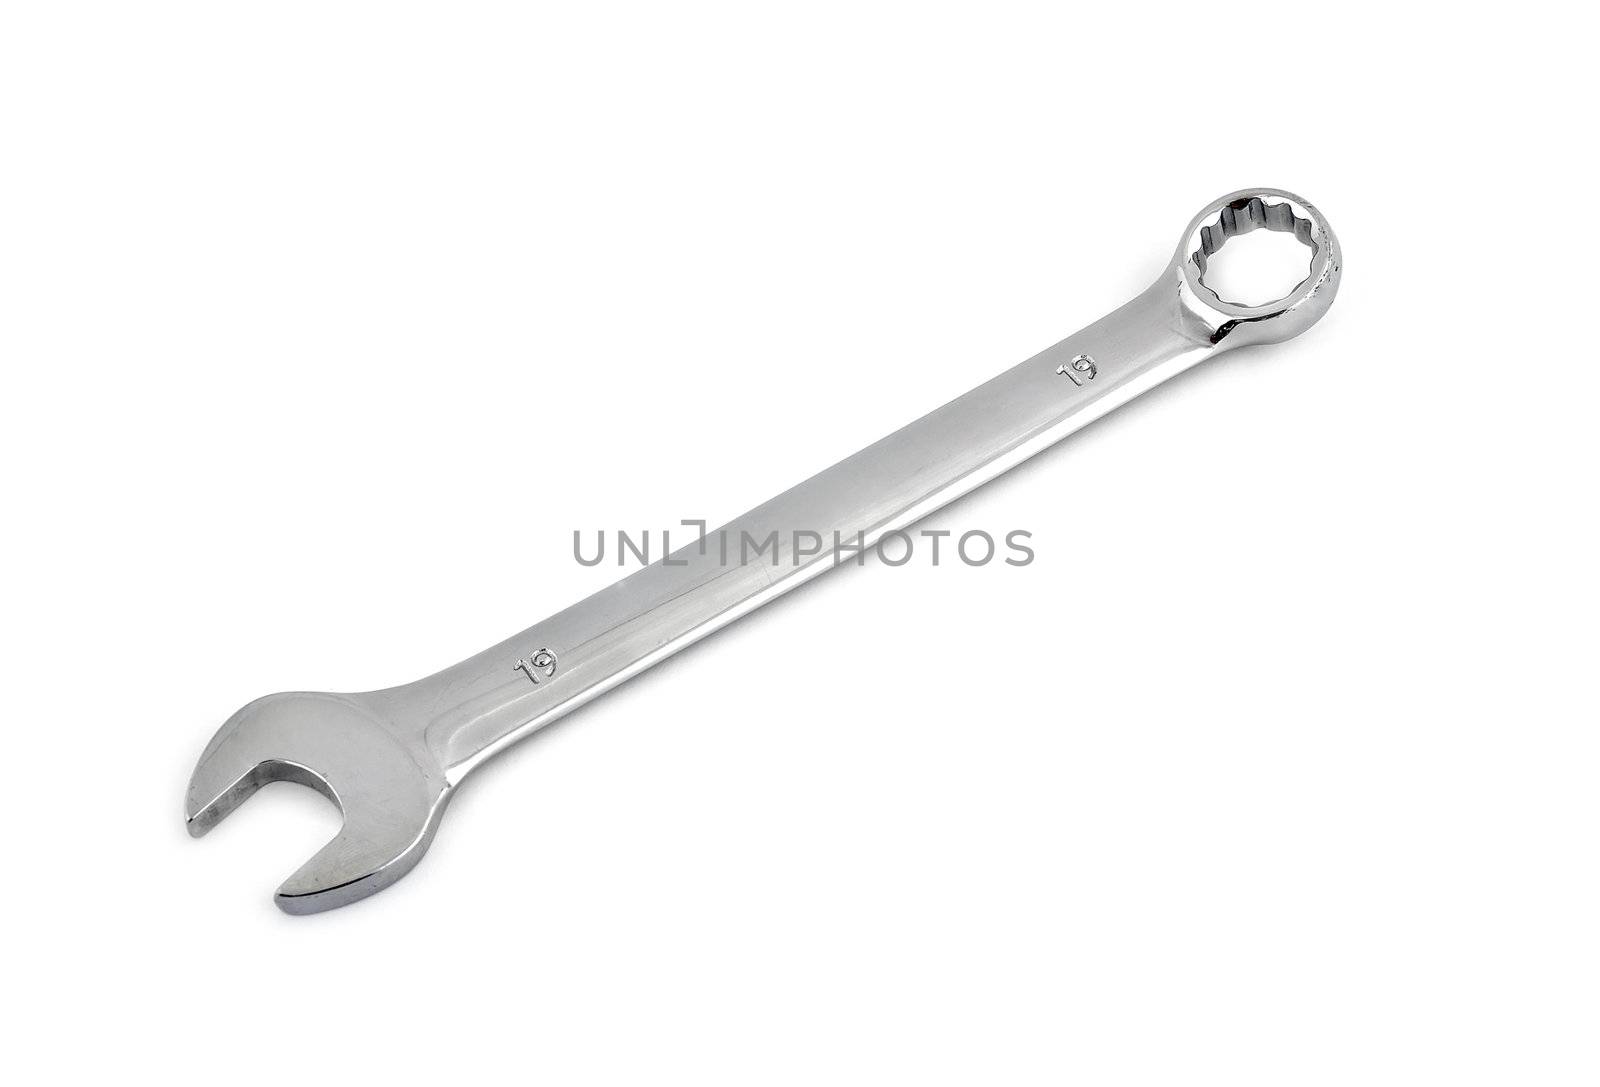 Spanner wrench on white background